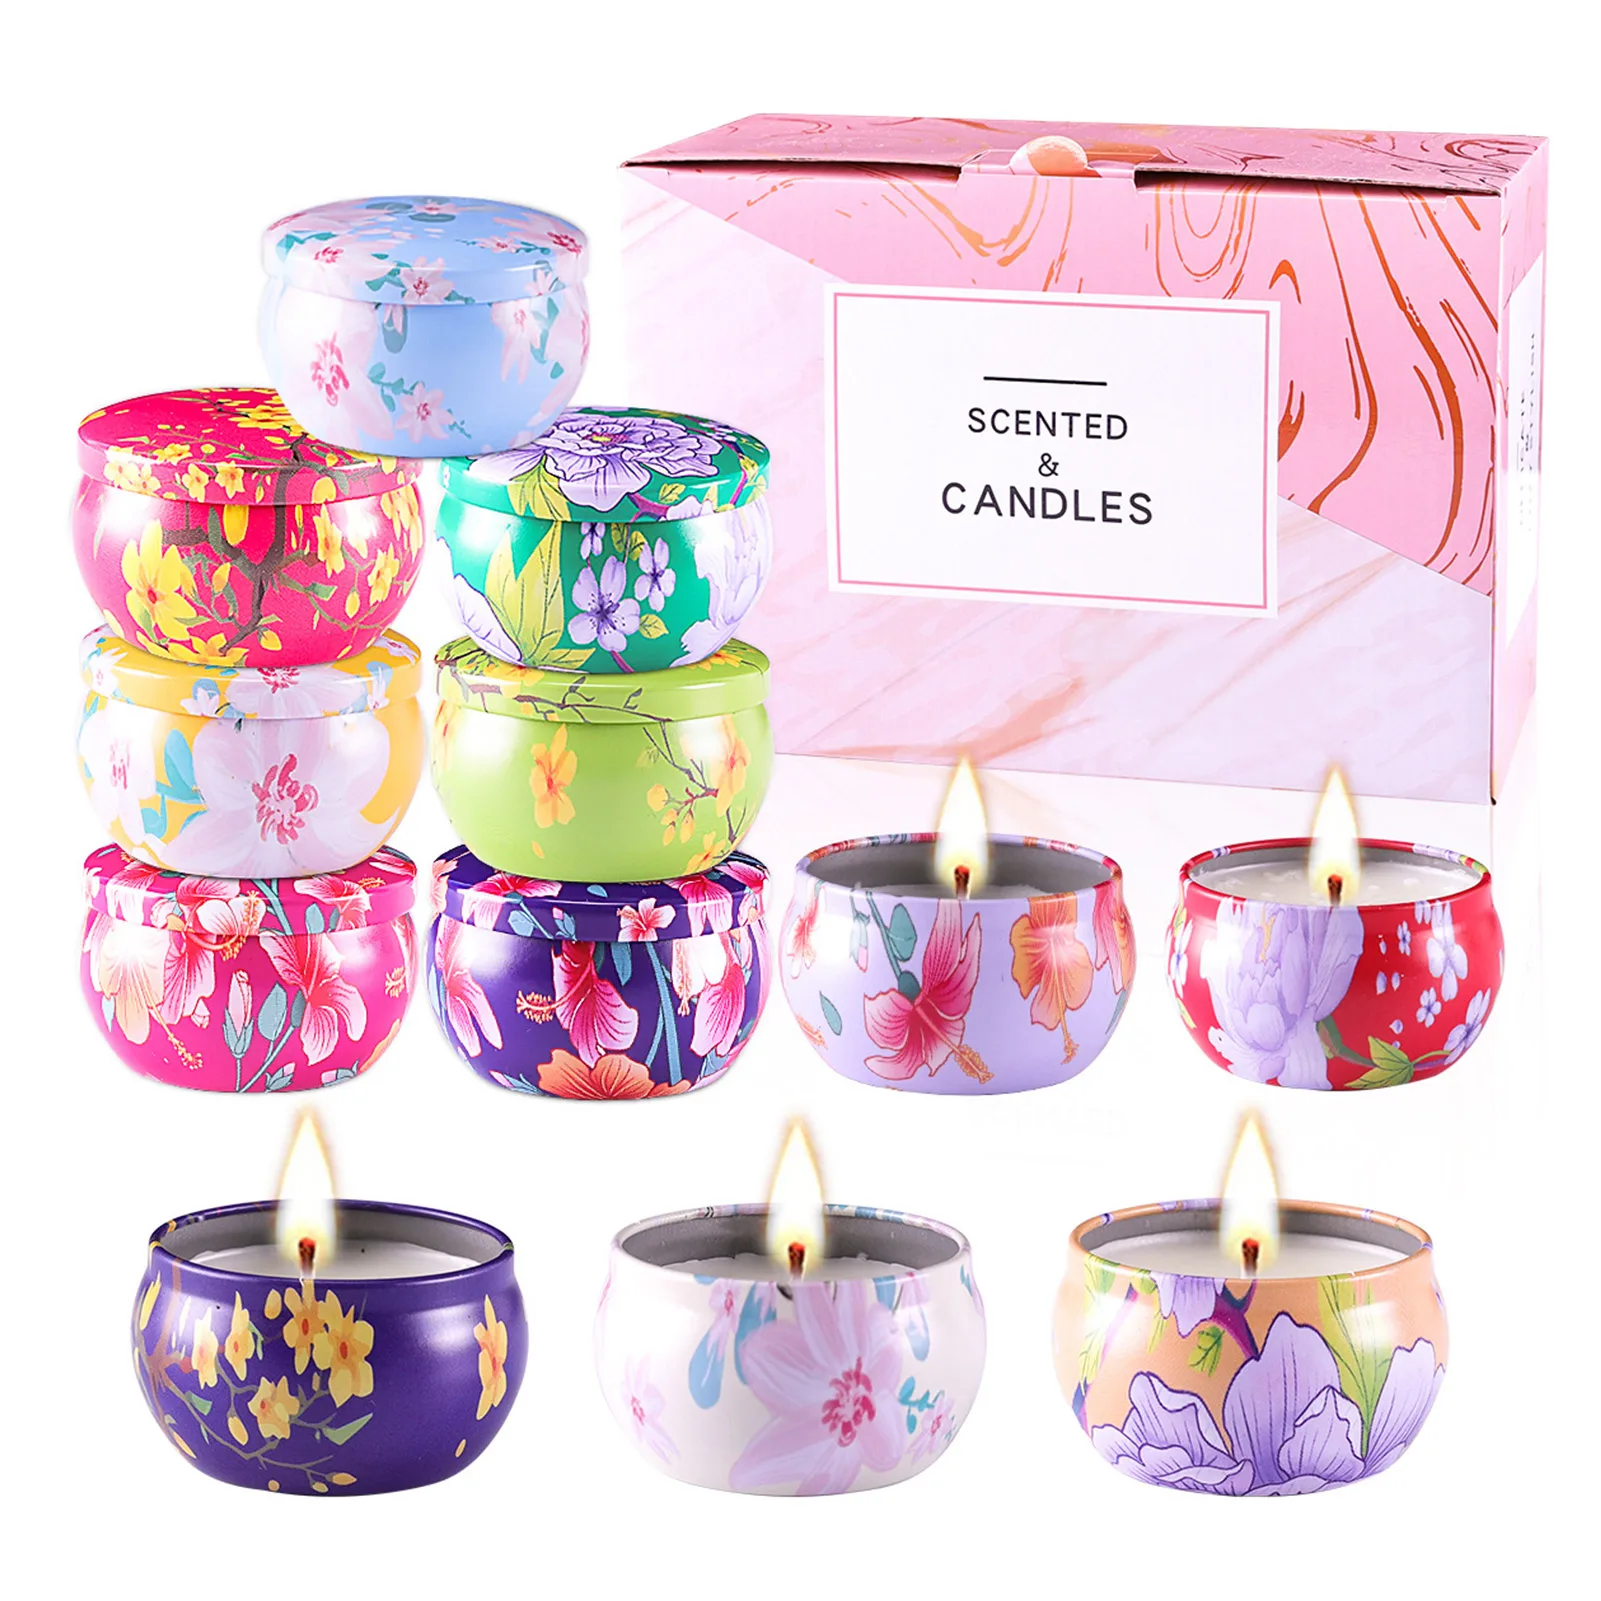 

Scented Candles Set Soy Wax Jar Candles Aromatherapy Candles With Portable Travel Tin Christmas Gifts For Women Mom Wife Birthda